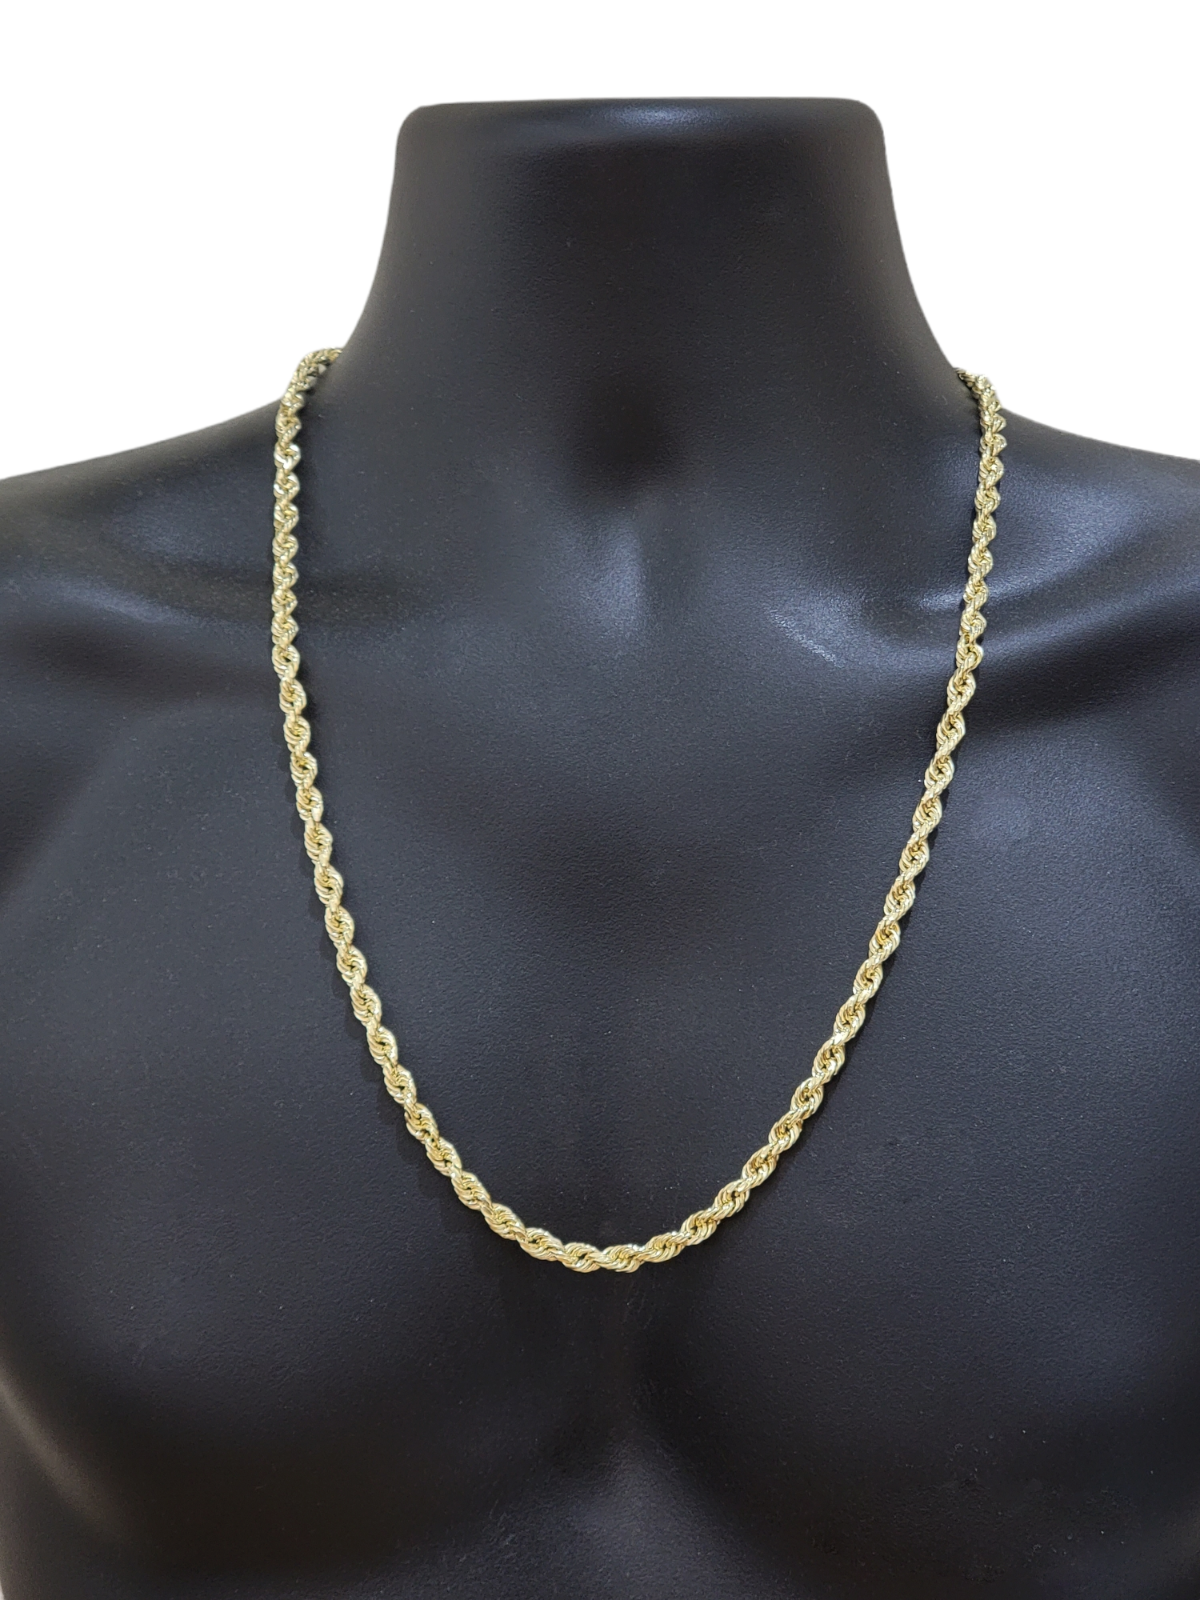 Men's Stainless Steel 6mm Rope Chain Necklace. Available sizes: 20, 22, 24  and 26 inch long – Noe's Jewelry